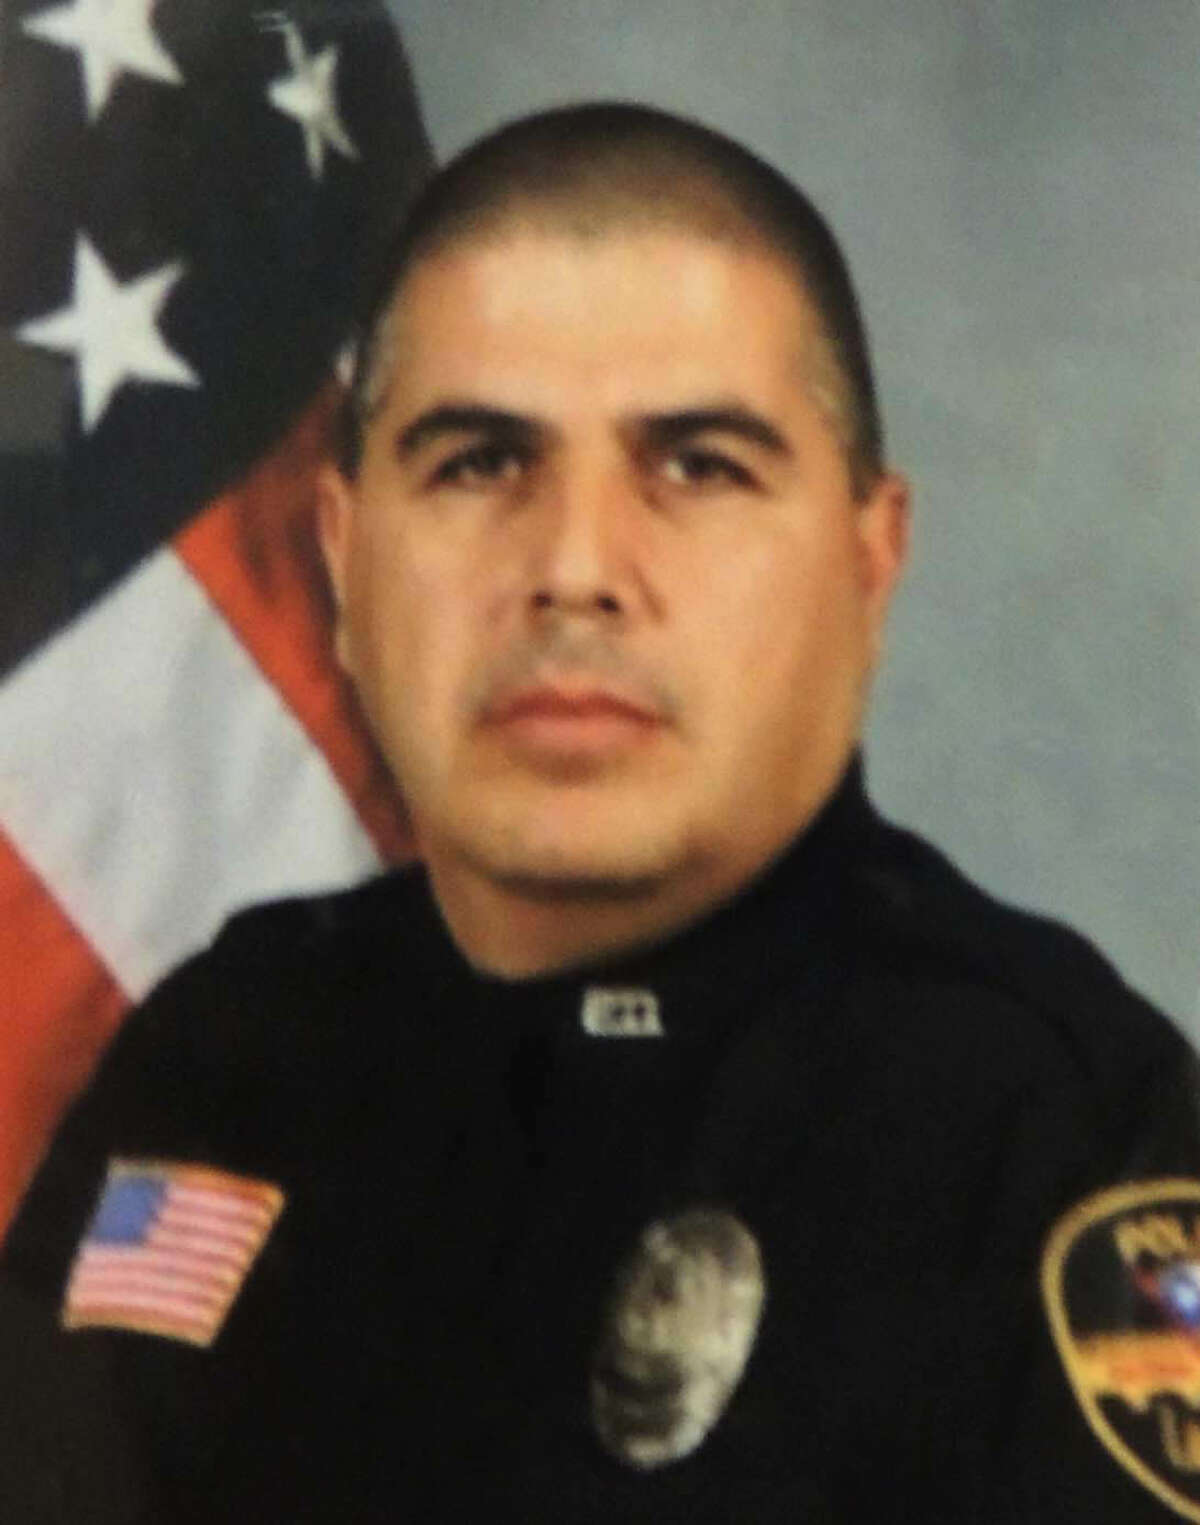 Mario Casares Jr., 49, is a 19-year veteran officer with the Laredo Police Department.